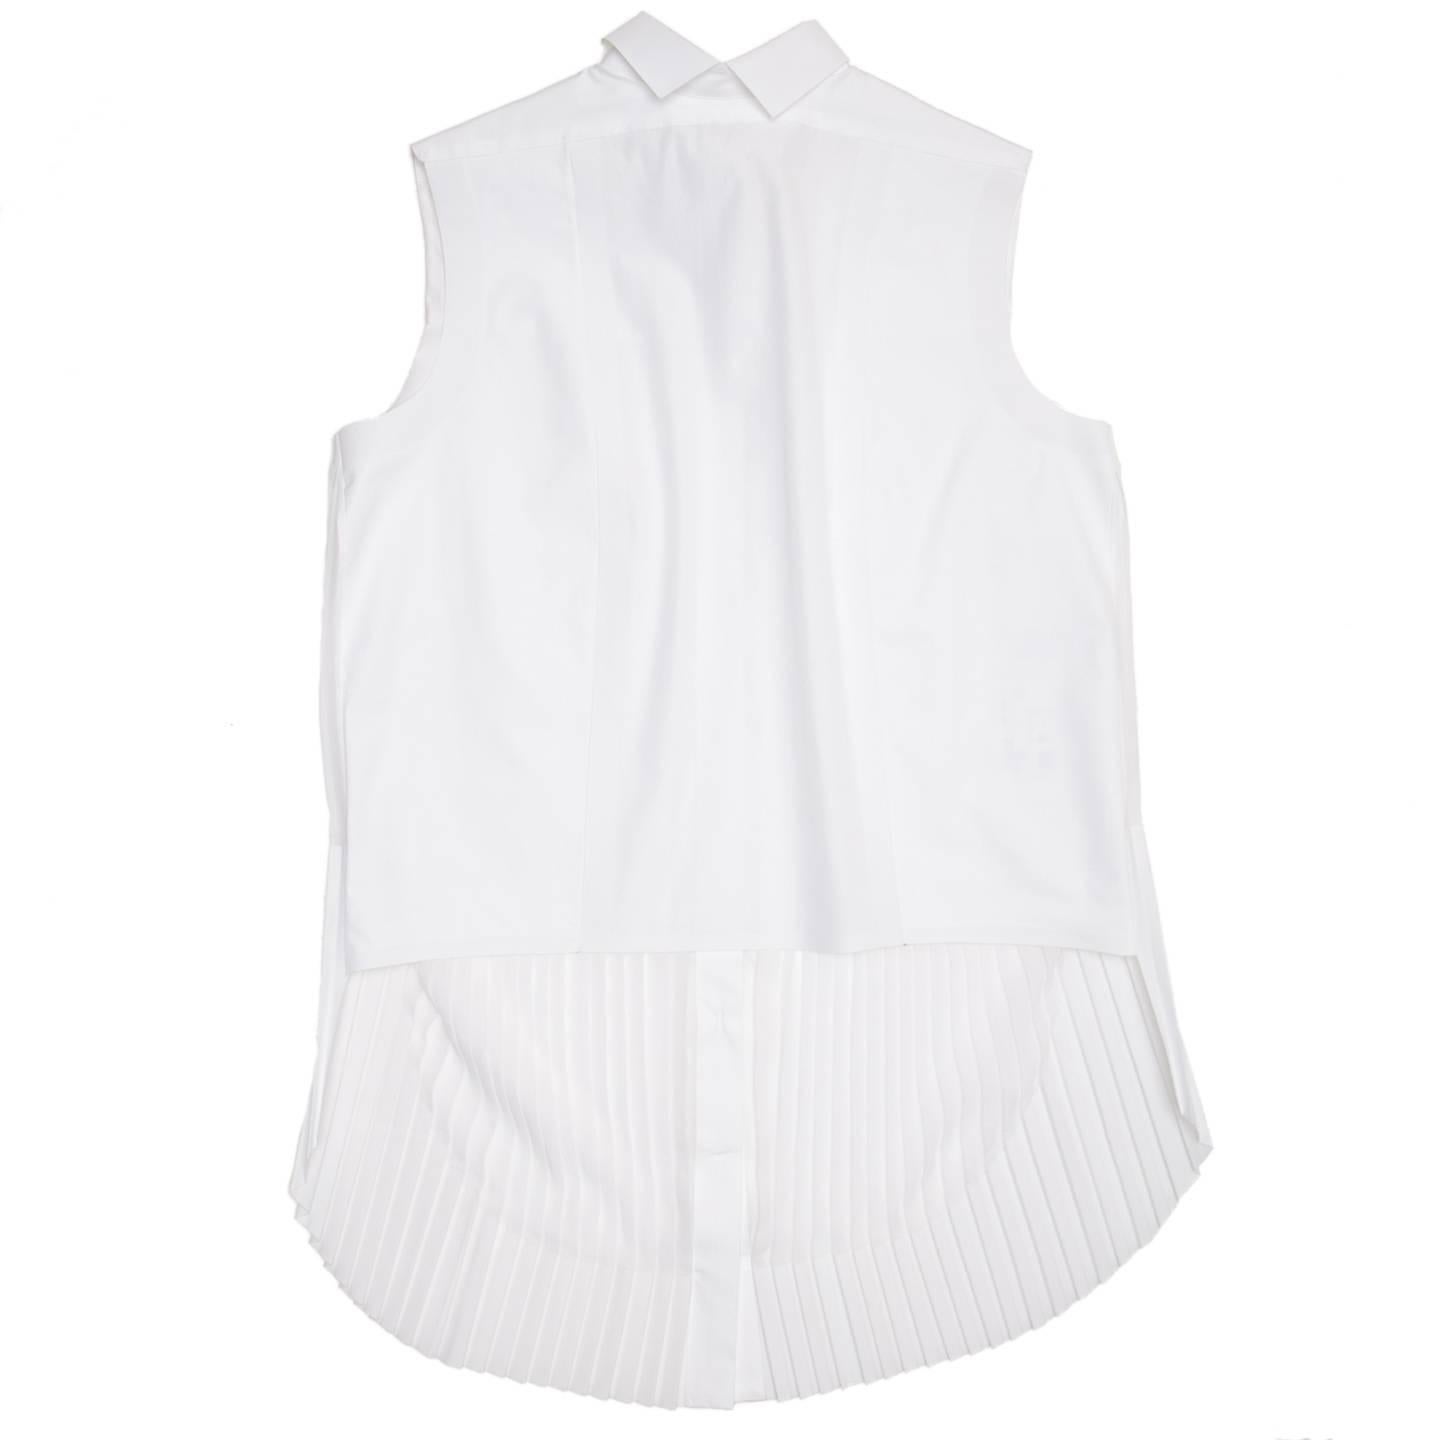 White shirt with a small peter pan collar with points at central back to duplicate the front. The back body is fitted, short and made of pure cotton. The front top part is made of a double layer of cotton to create rigidity, as well as the button